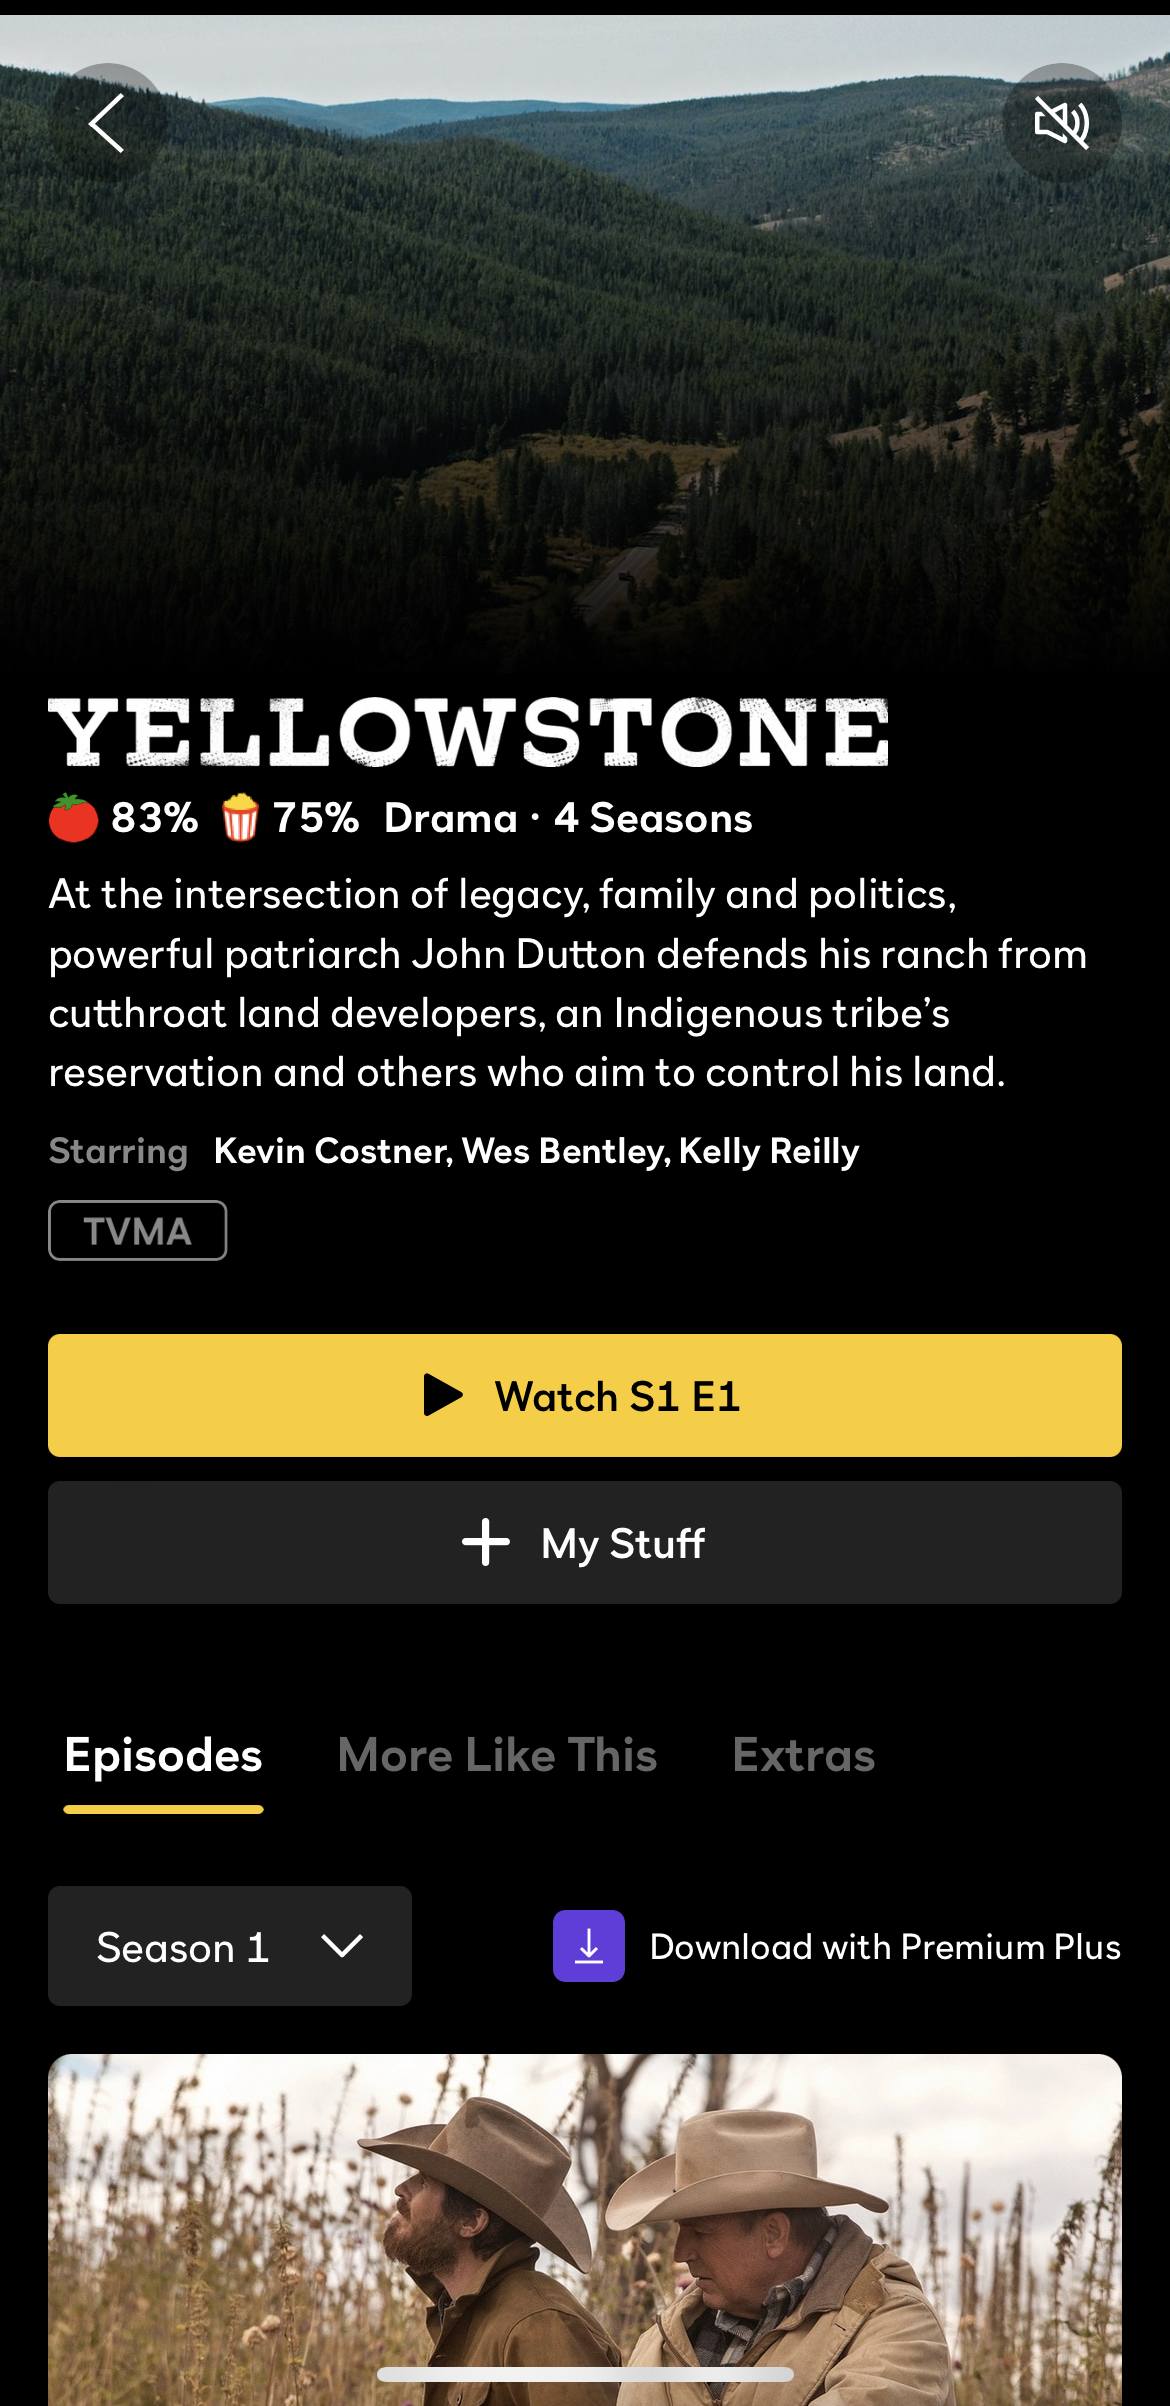 Watch: 'Yellowstone' star Wes Bentley says playing Jamie Dutton can be  'tricky' - UPI.com